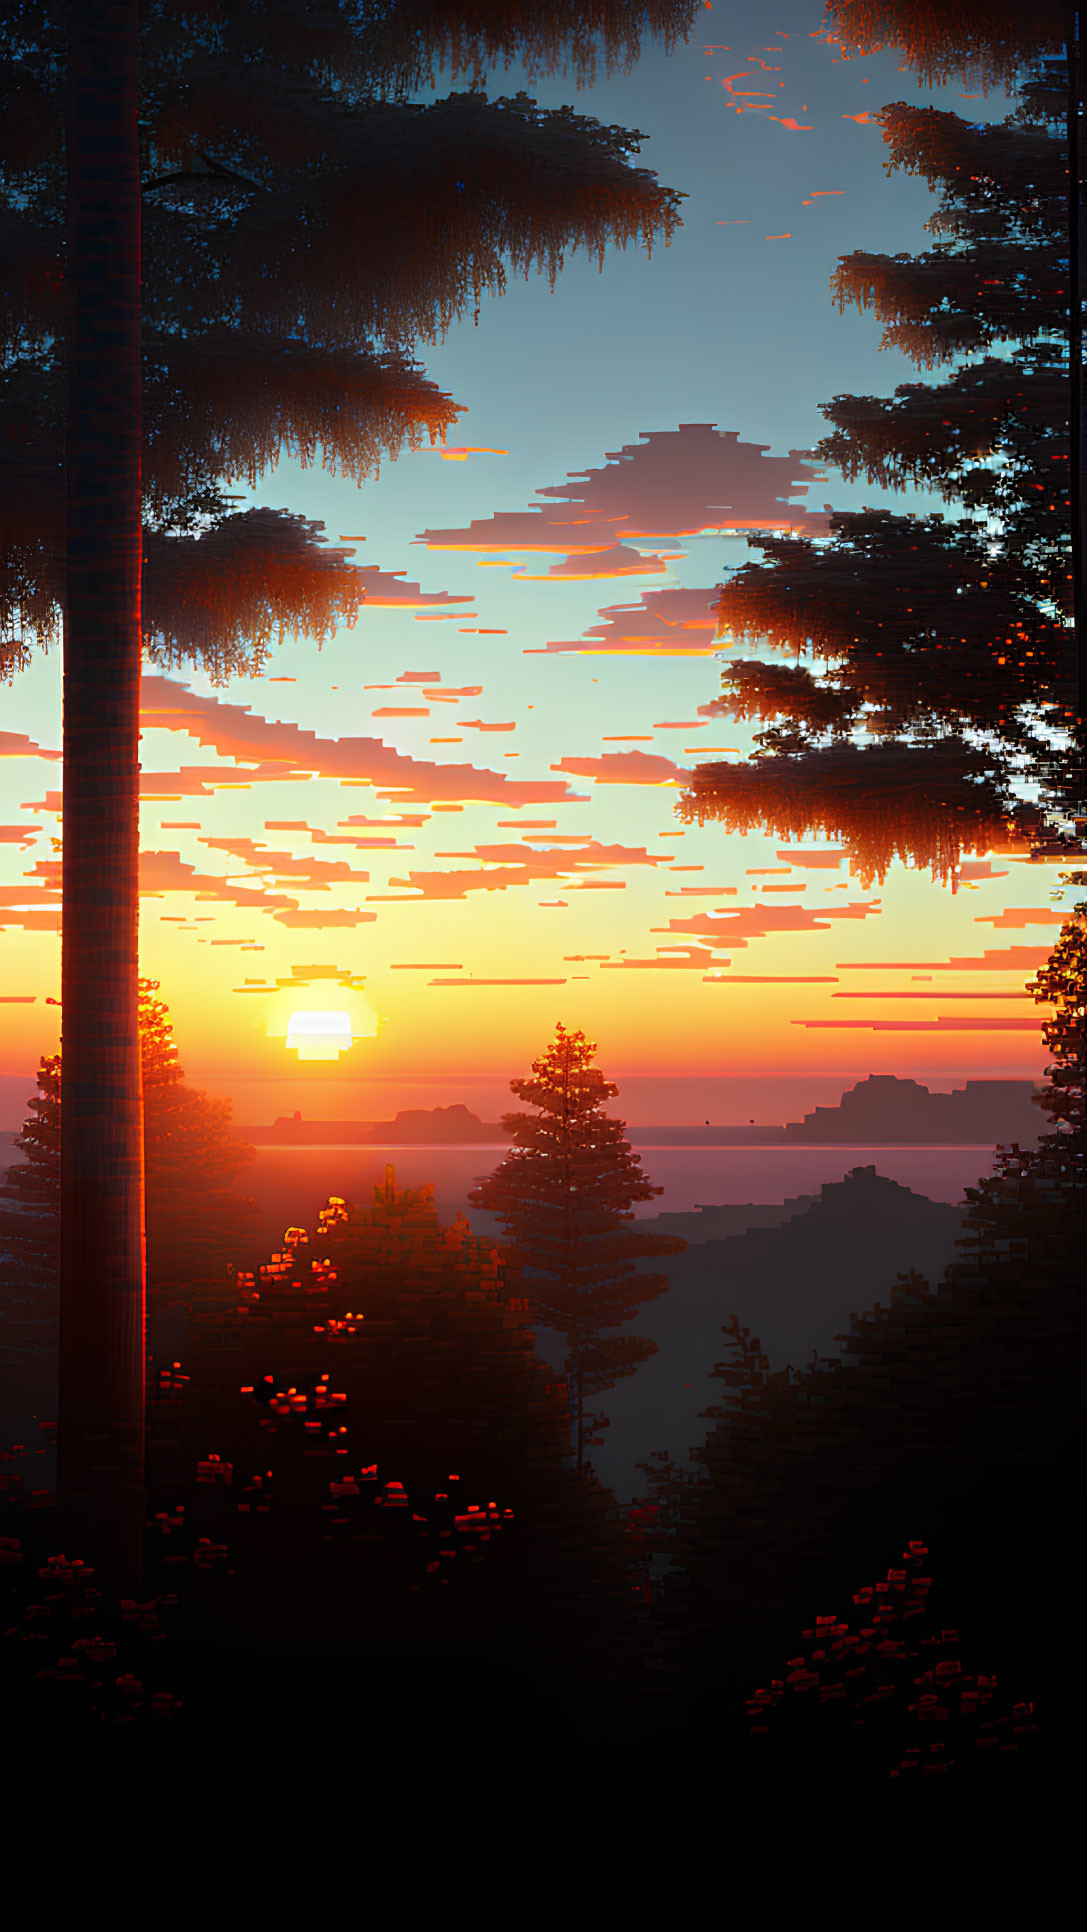 A Pixelated Sunset